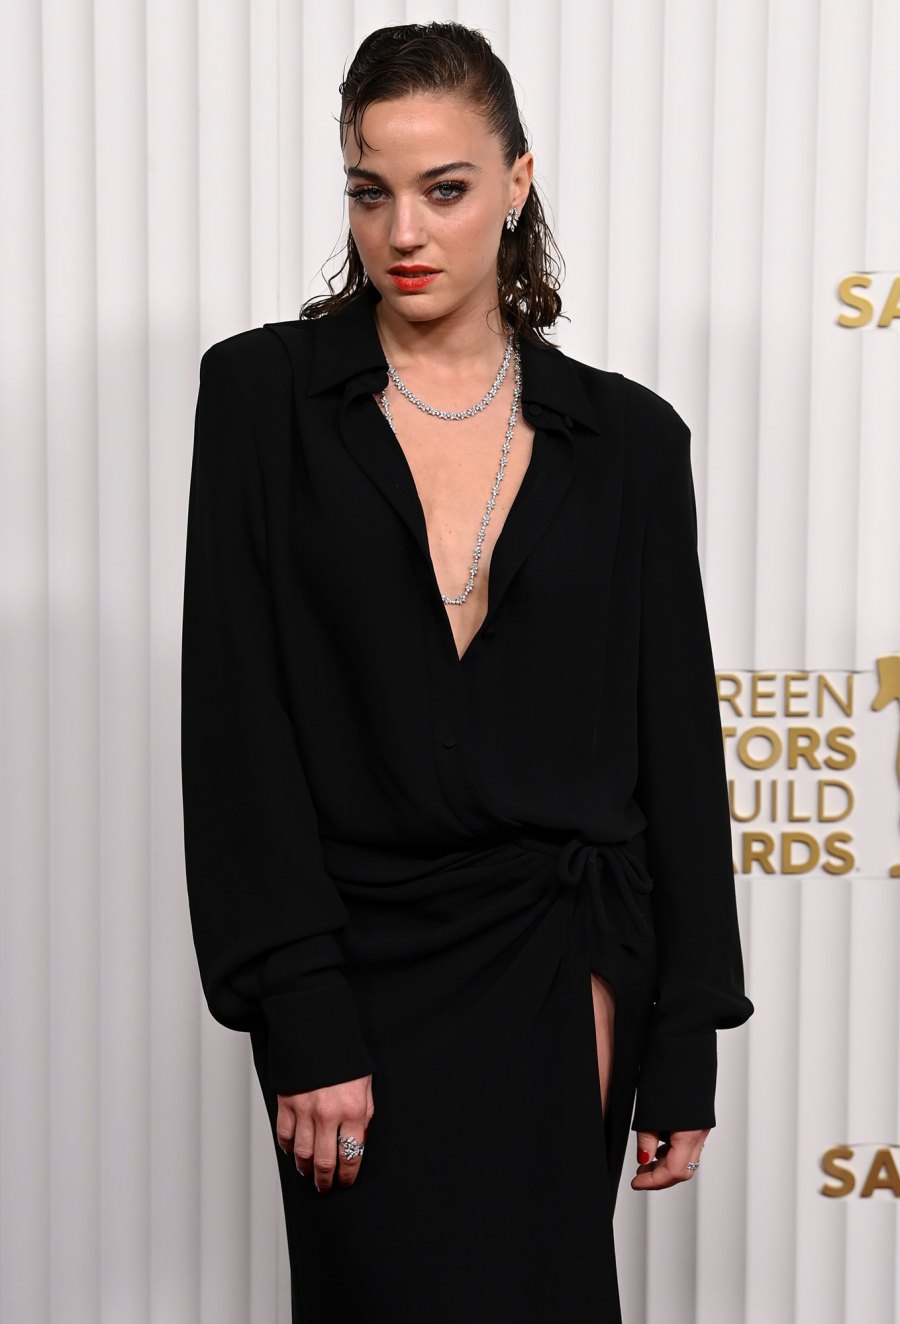 The 'White Lotus' Cast Brings Their A-Game to the 2023 SAG Awards Red Carpet: Haley Lu Richardson, Theo James and More Beatrice